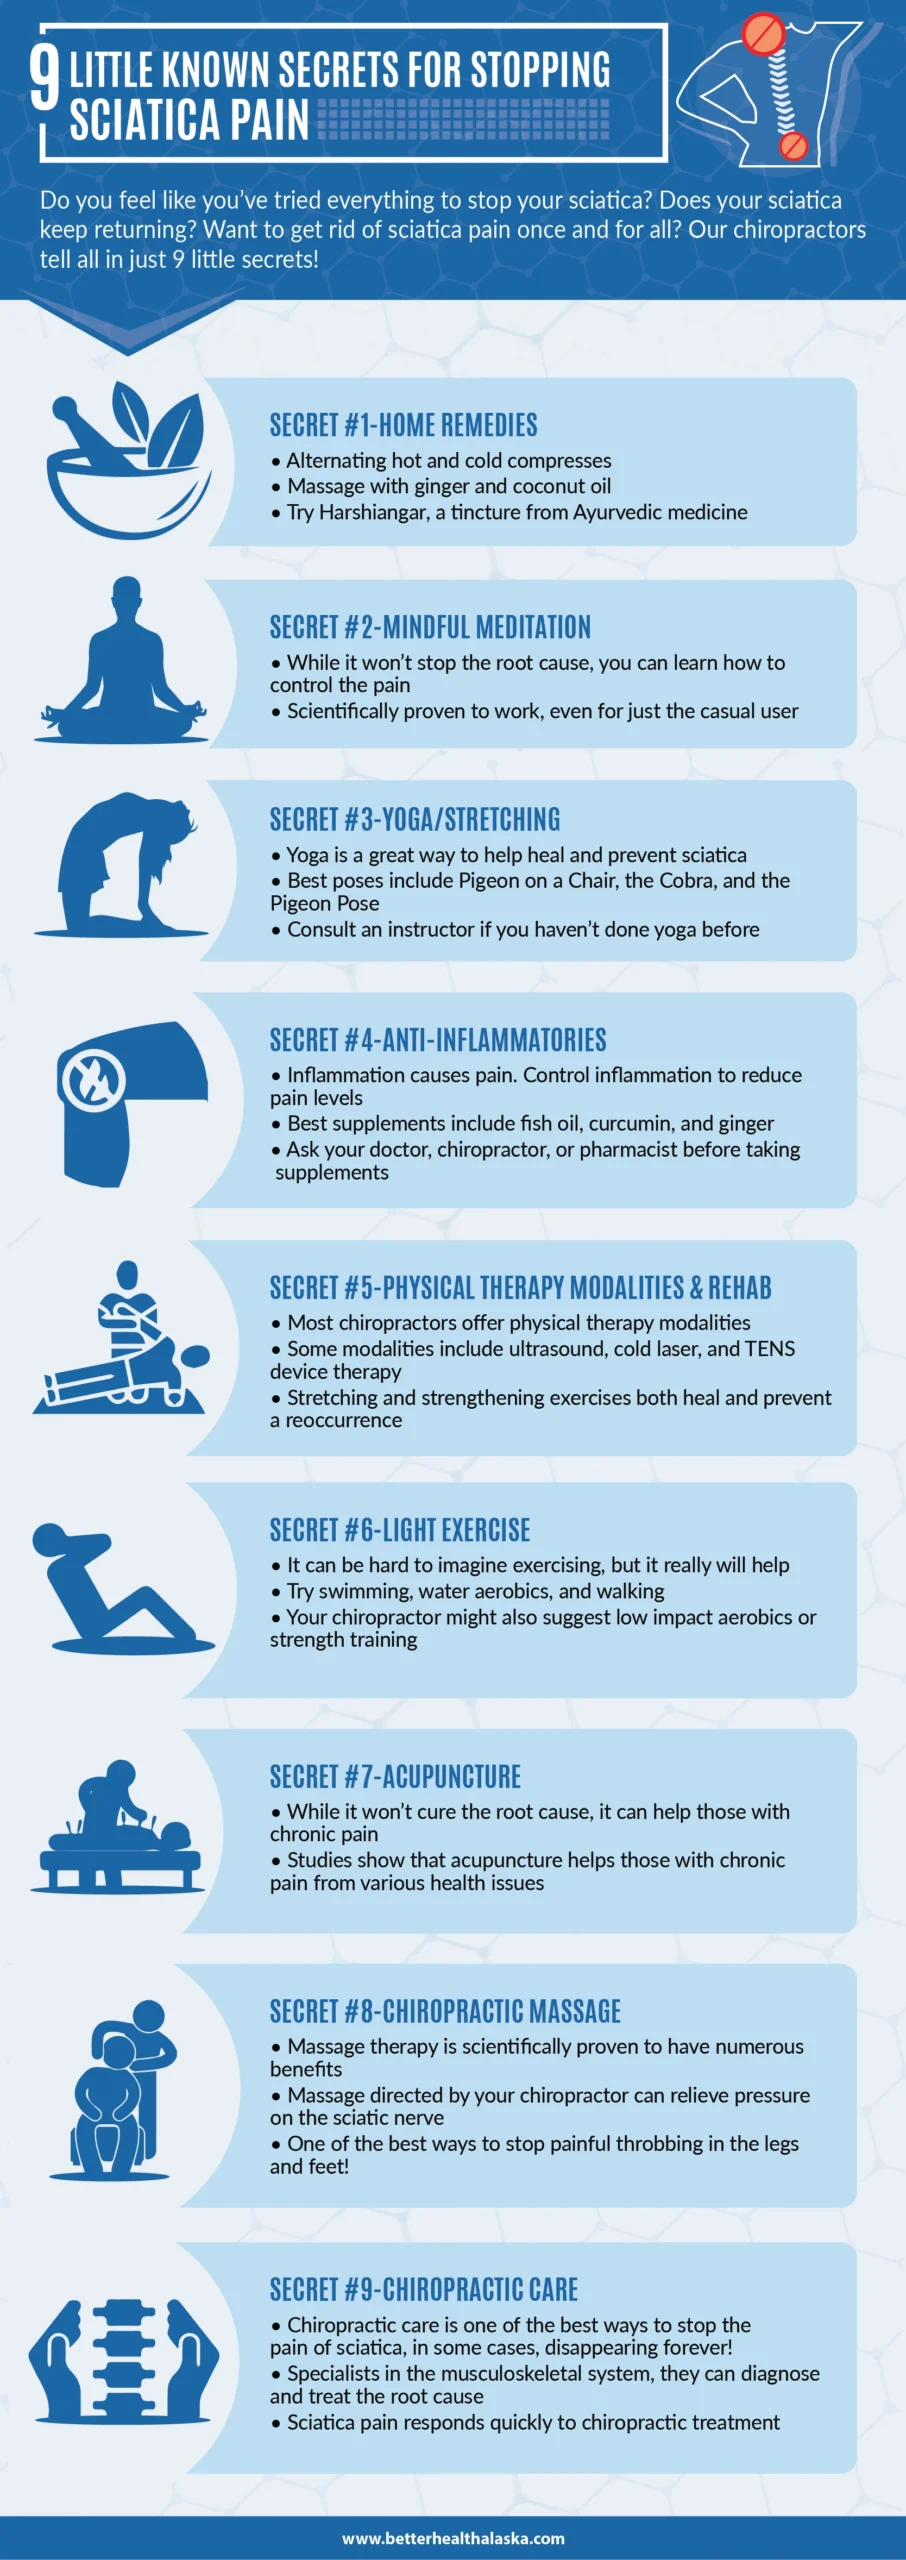 An infographic of tips to stop sciatica pain.